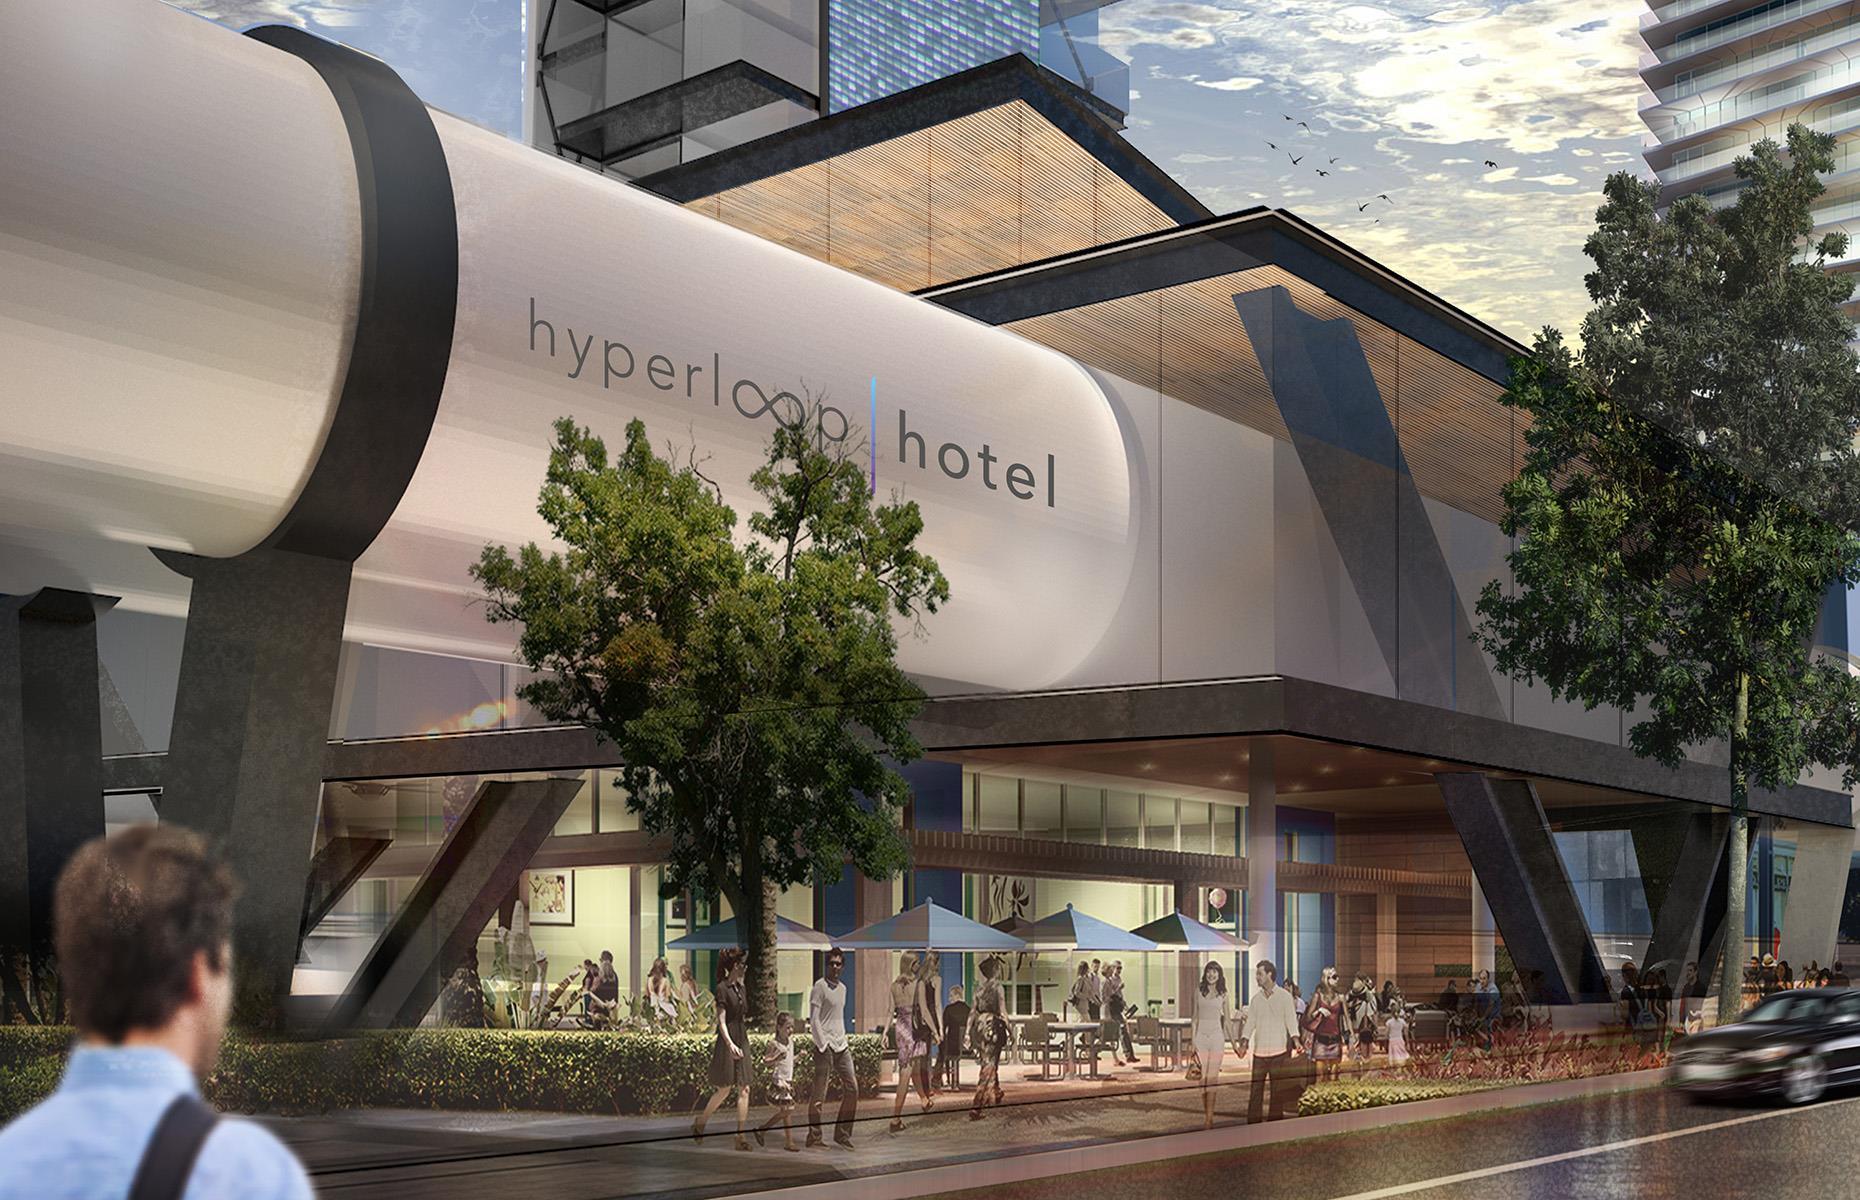 <p>Designed by architecture student Brandan Siebrecht, <a href="https://www.livescience.com/59552-hyperloop-hotel-radical-innovation-award.html">who won the 2017 Radical Innovation Award for the idea</a>, the ultra-futuristic Hyperloop Hotel is a hybrid between a hotel room and a high-speed train. It would use the Hyperloop transit system that’s currently being developed by Elon Musk to whizz guests between 13 US cities – all from the comfort of their very own pod. </p>